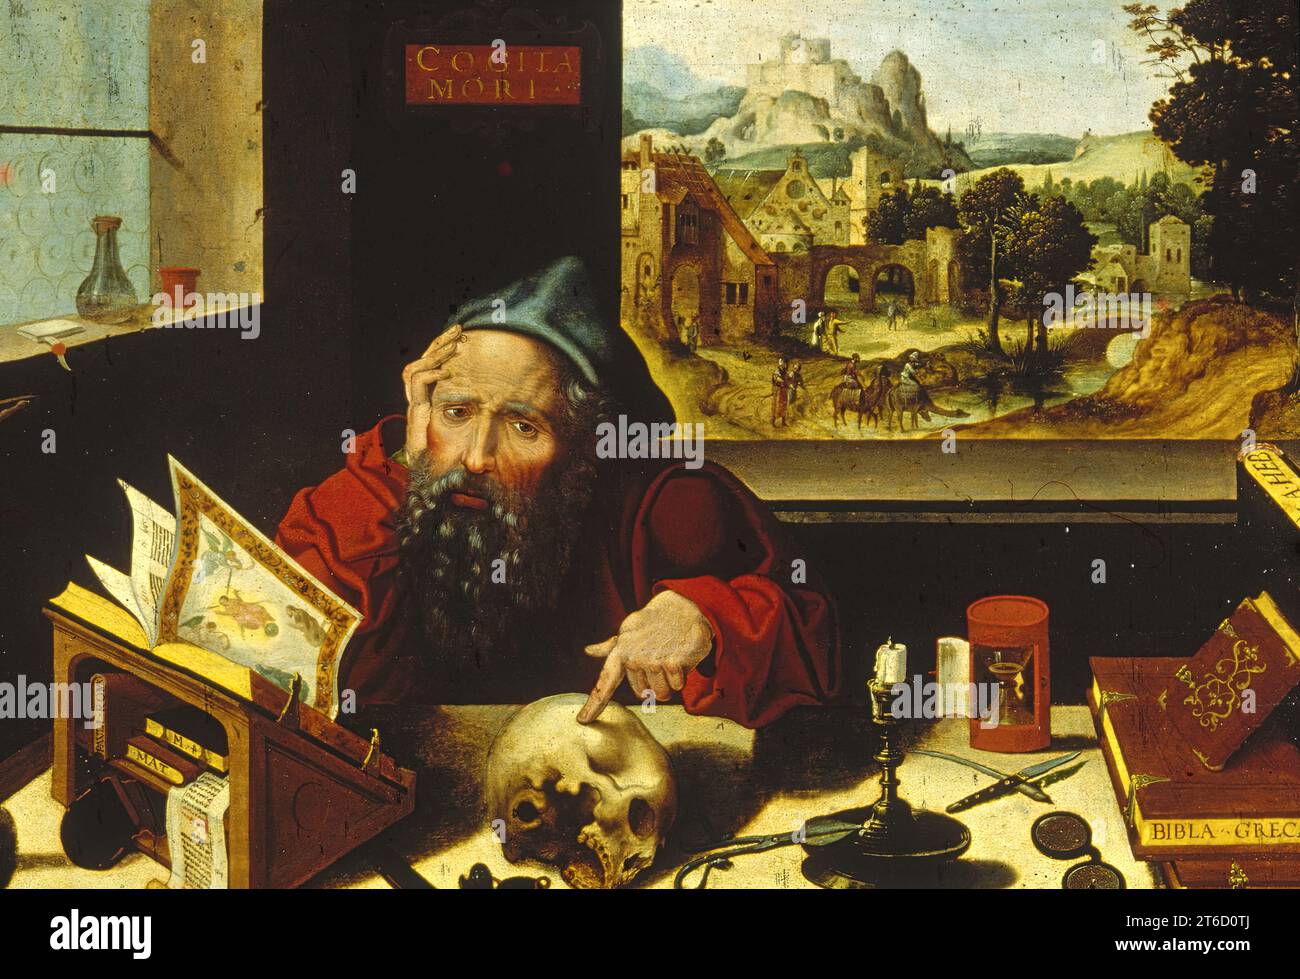 Saint Jerome in His Study, c1530. St. Jerome (ca. 341-420 CE), the greatest Christian scholar of the classics, is revered for his translation of the Bible from the original Greek and Hebrew into Latin. He completed it in a monastery in Palestine, which the artist has suggested in the view through the window by adding camels to an otherwise Flemish landscape. The admonition that Jerome has fixed to the wall, &quot;Cogita Mori&quot; (Think upon death), is made explicit by the skull. His Bible is open to an image of the Last Judgment, while the hourglass and candle, objects commonly found on a de Stock Photo